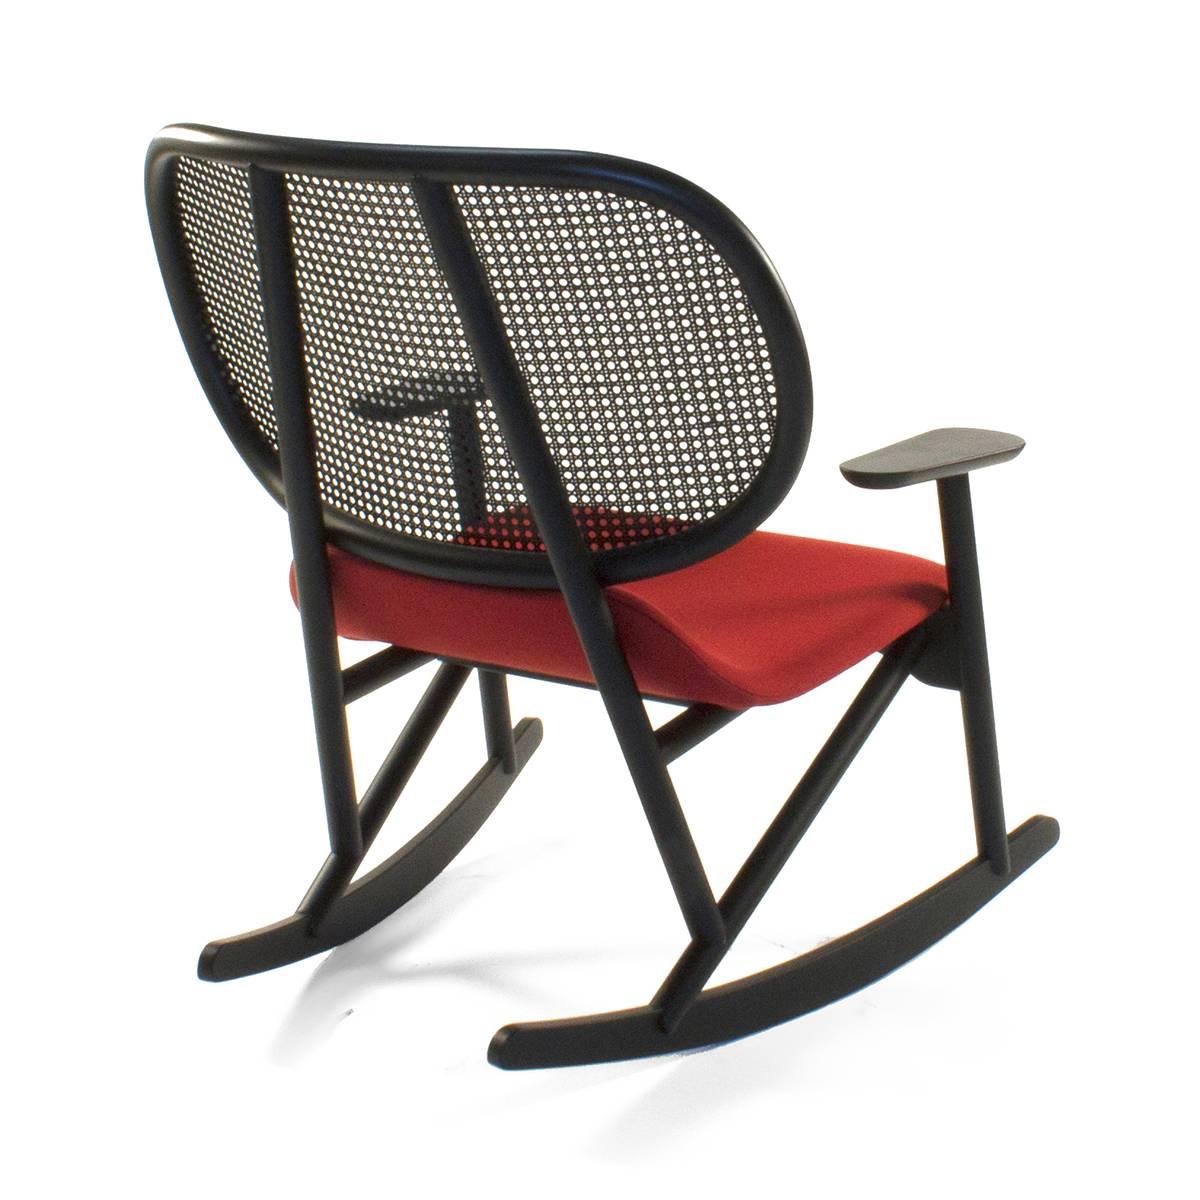 Moroso Klara Rocking Lounge Chair by Patricia Urquiola, Italy In Good Condition For Sale In Brooklyn, NY